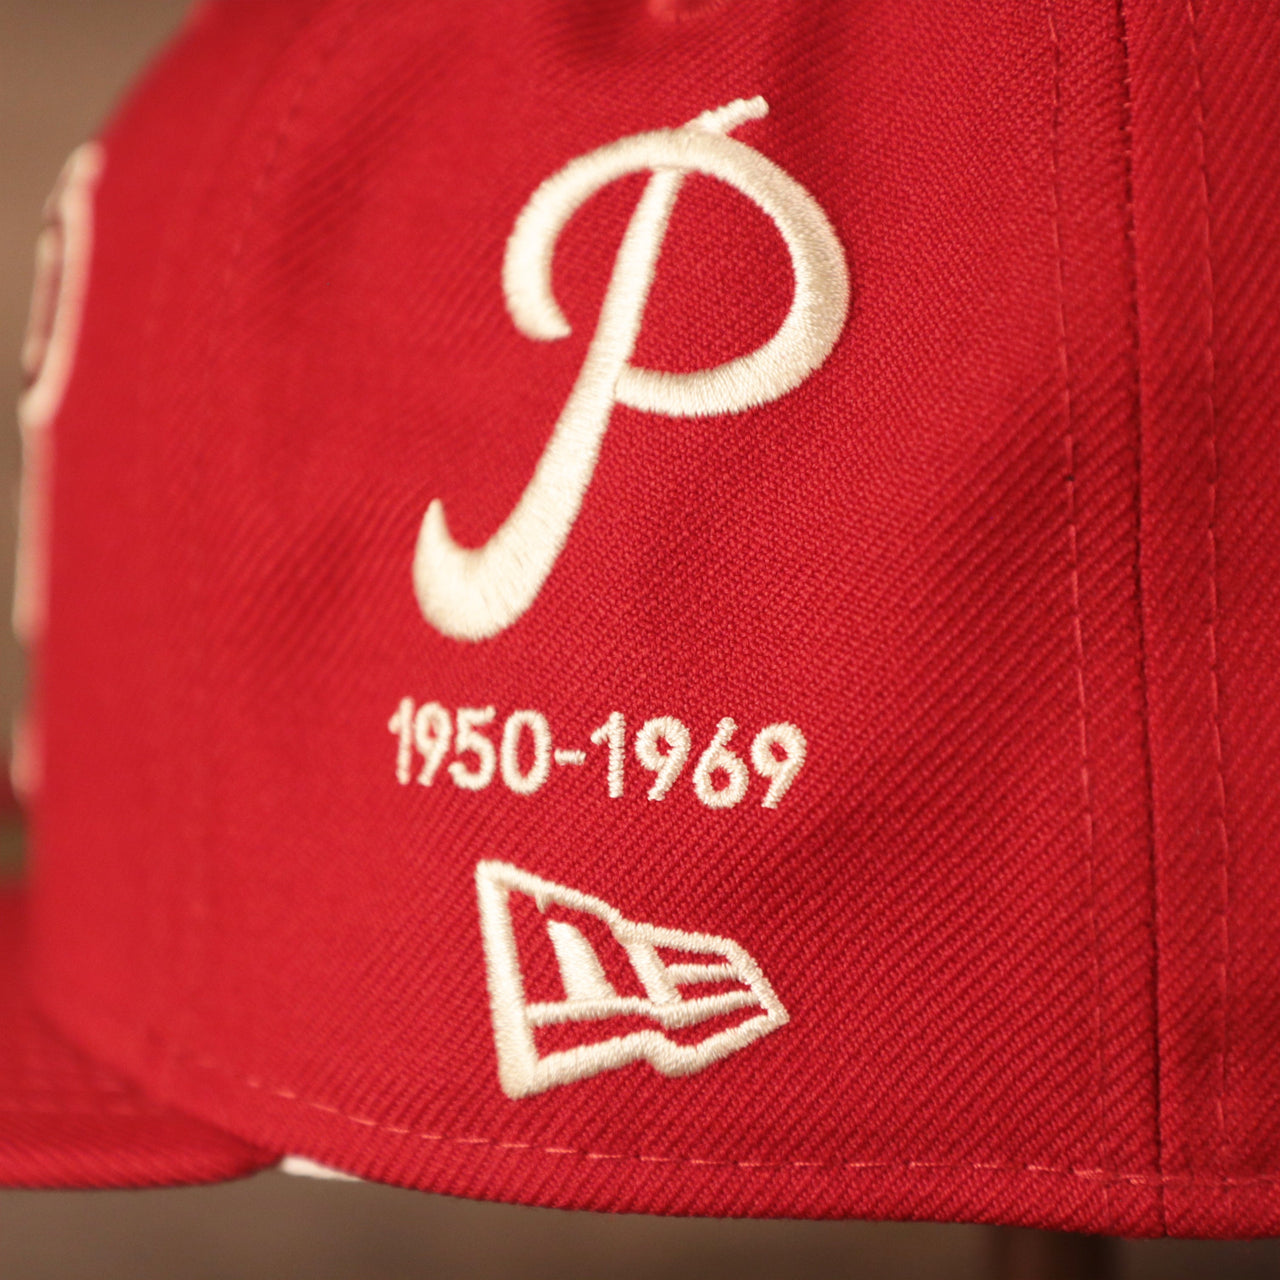 The Philadelphia Phillies logo on the red New Era 59fifty with all over patch fitted logo history of the team.